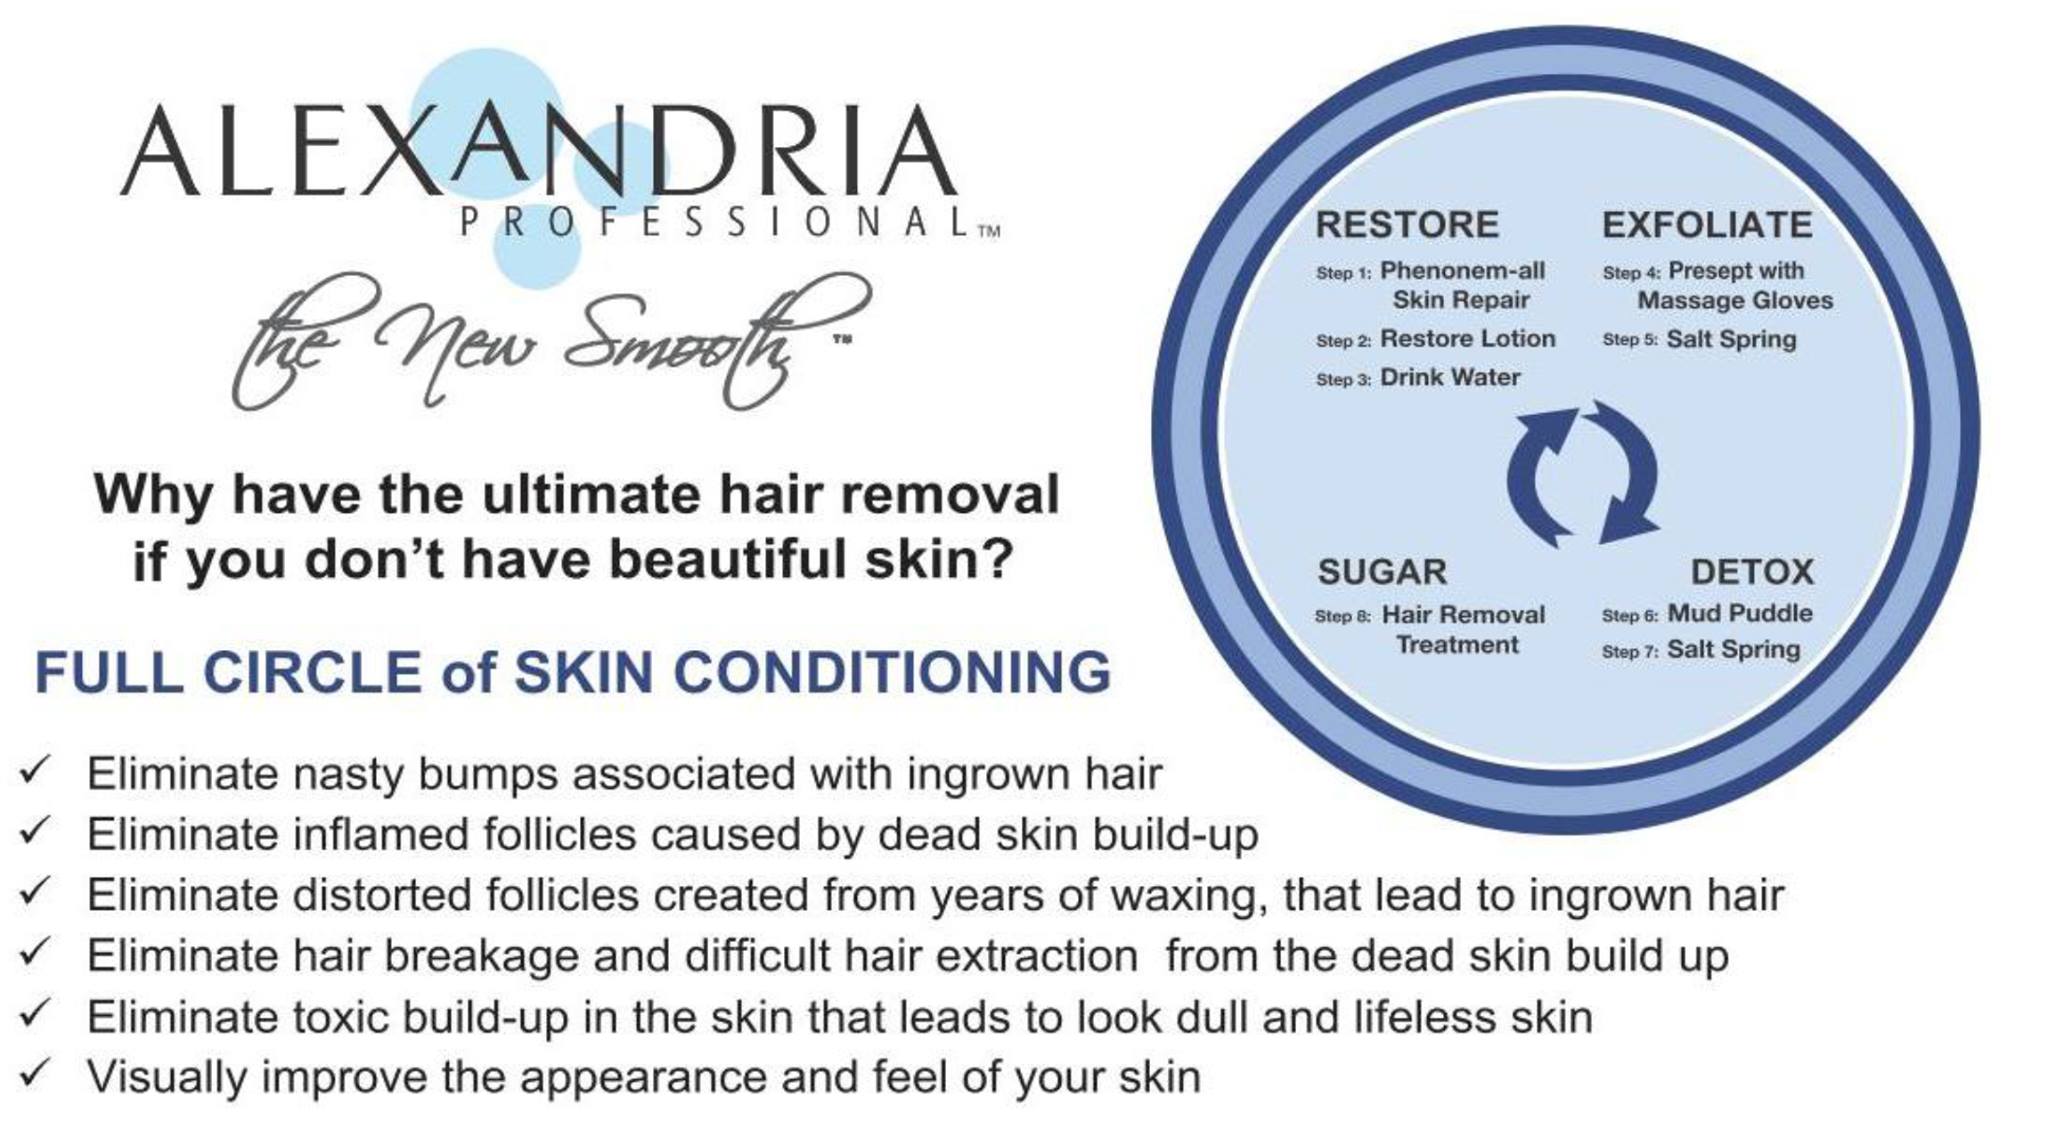 Full Circle of Skin Conditioning